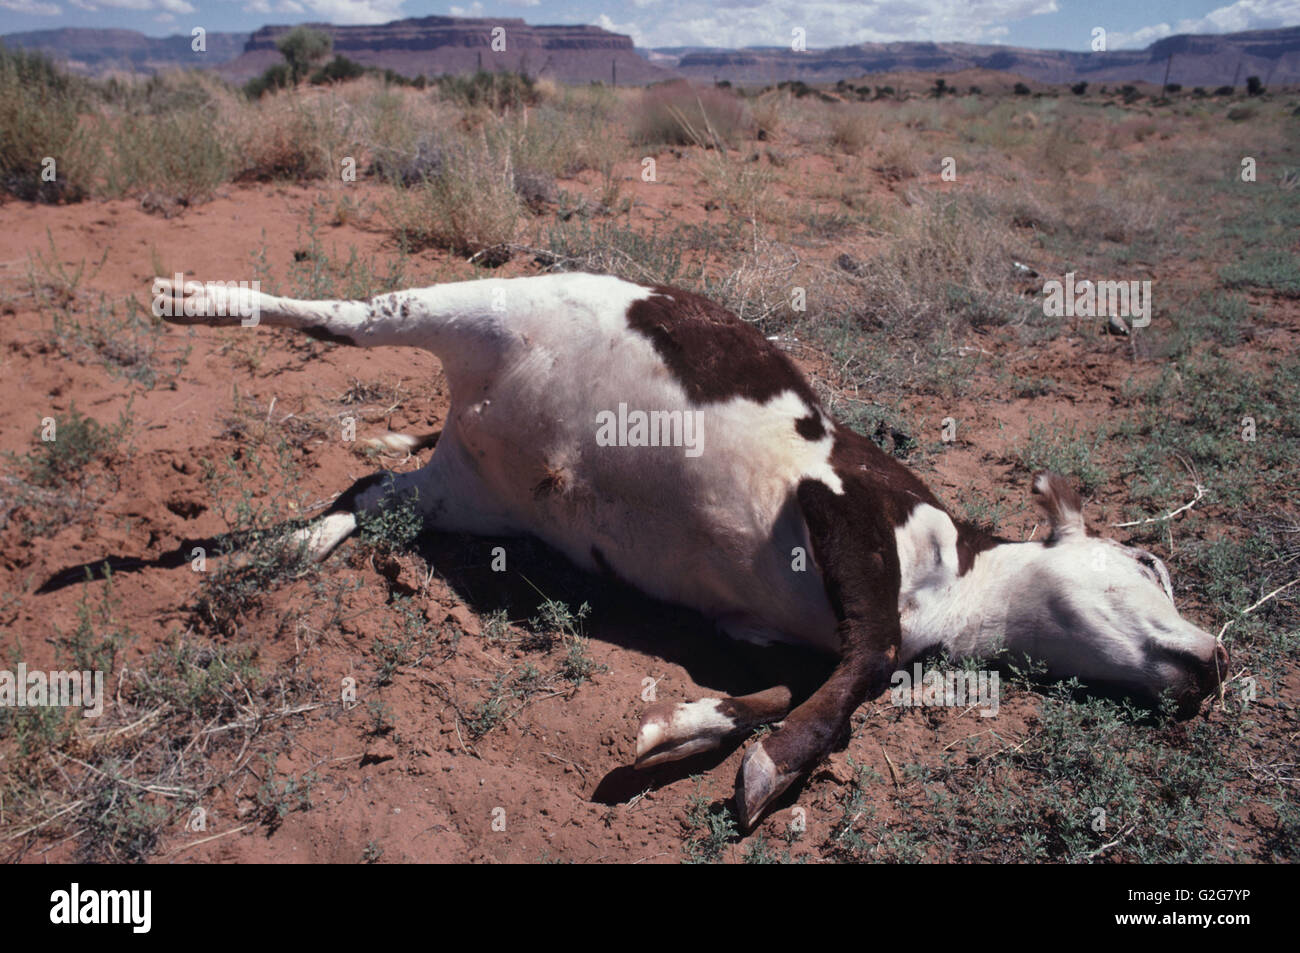 A dead cow hit by truck lies in the desert along Interstate 40 (Route 66) in Arizona. (Bos taurus) Stock Photo